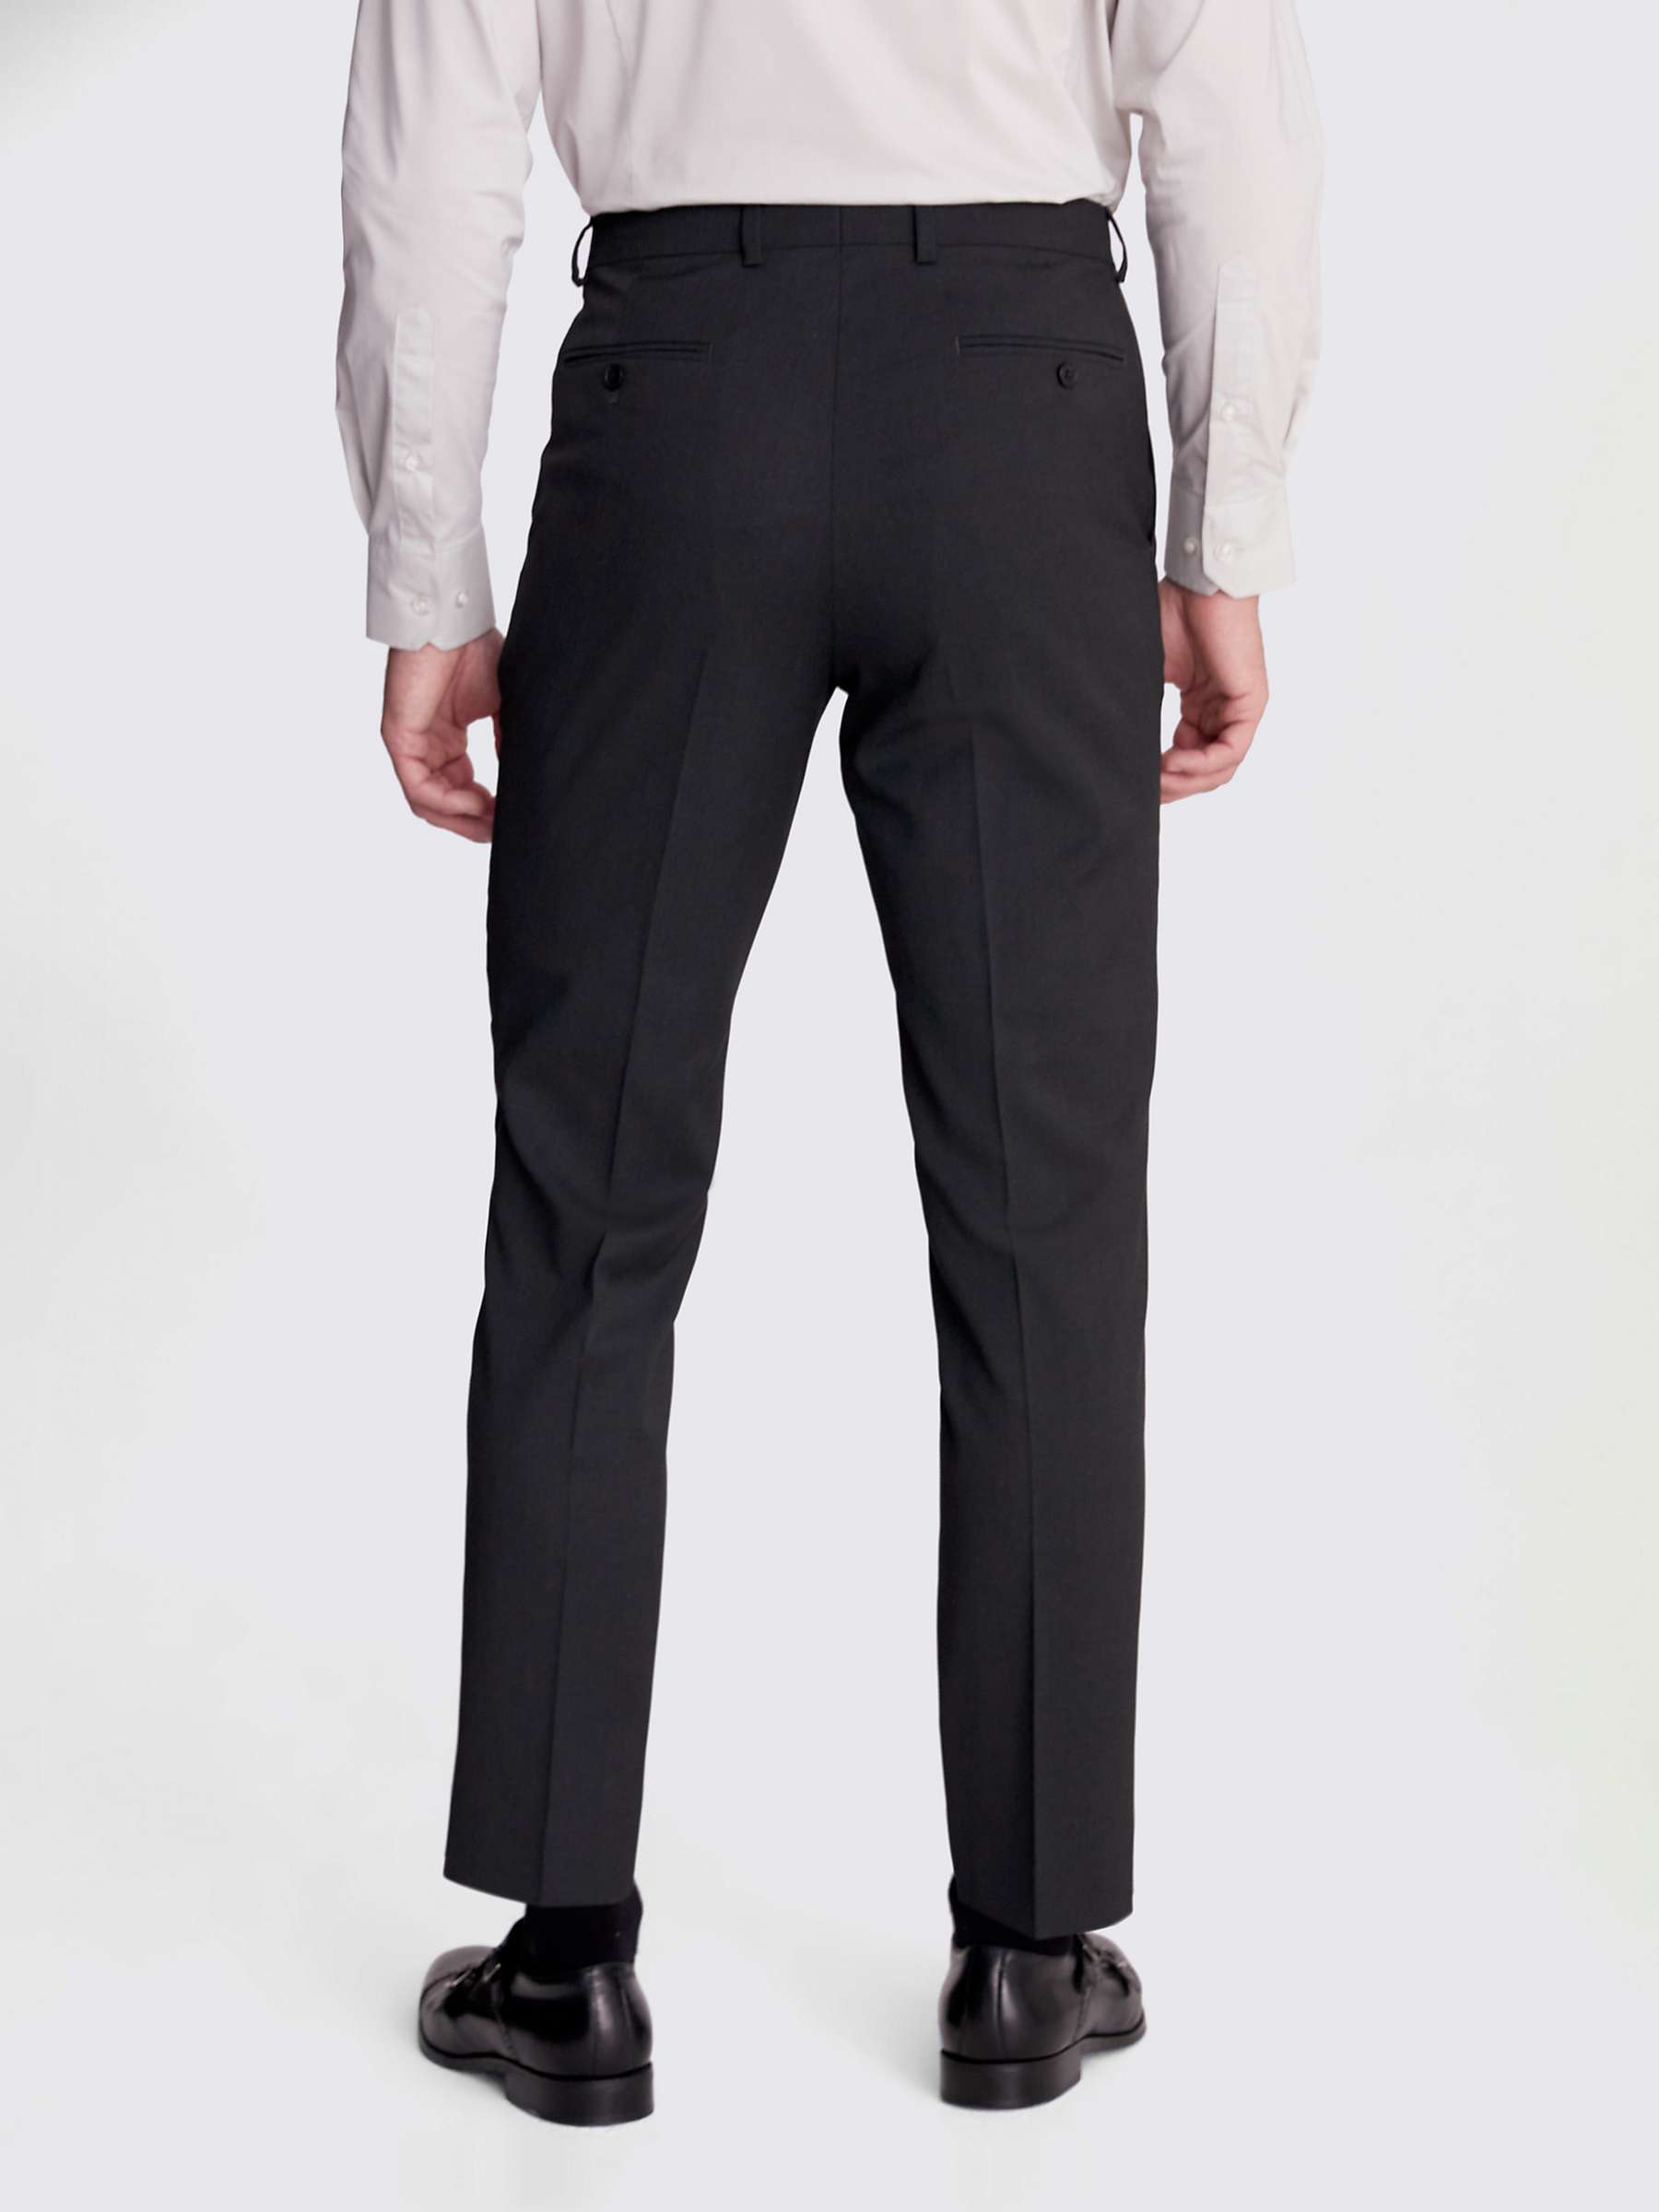 Moss Regular Fit Stretch Trousers, Grey at John Lewis & Partners